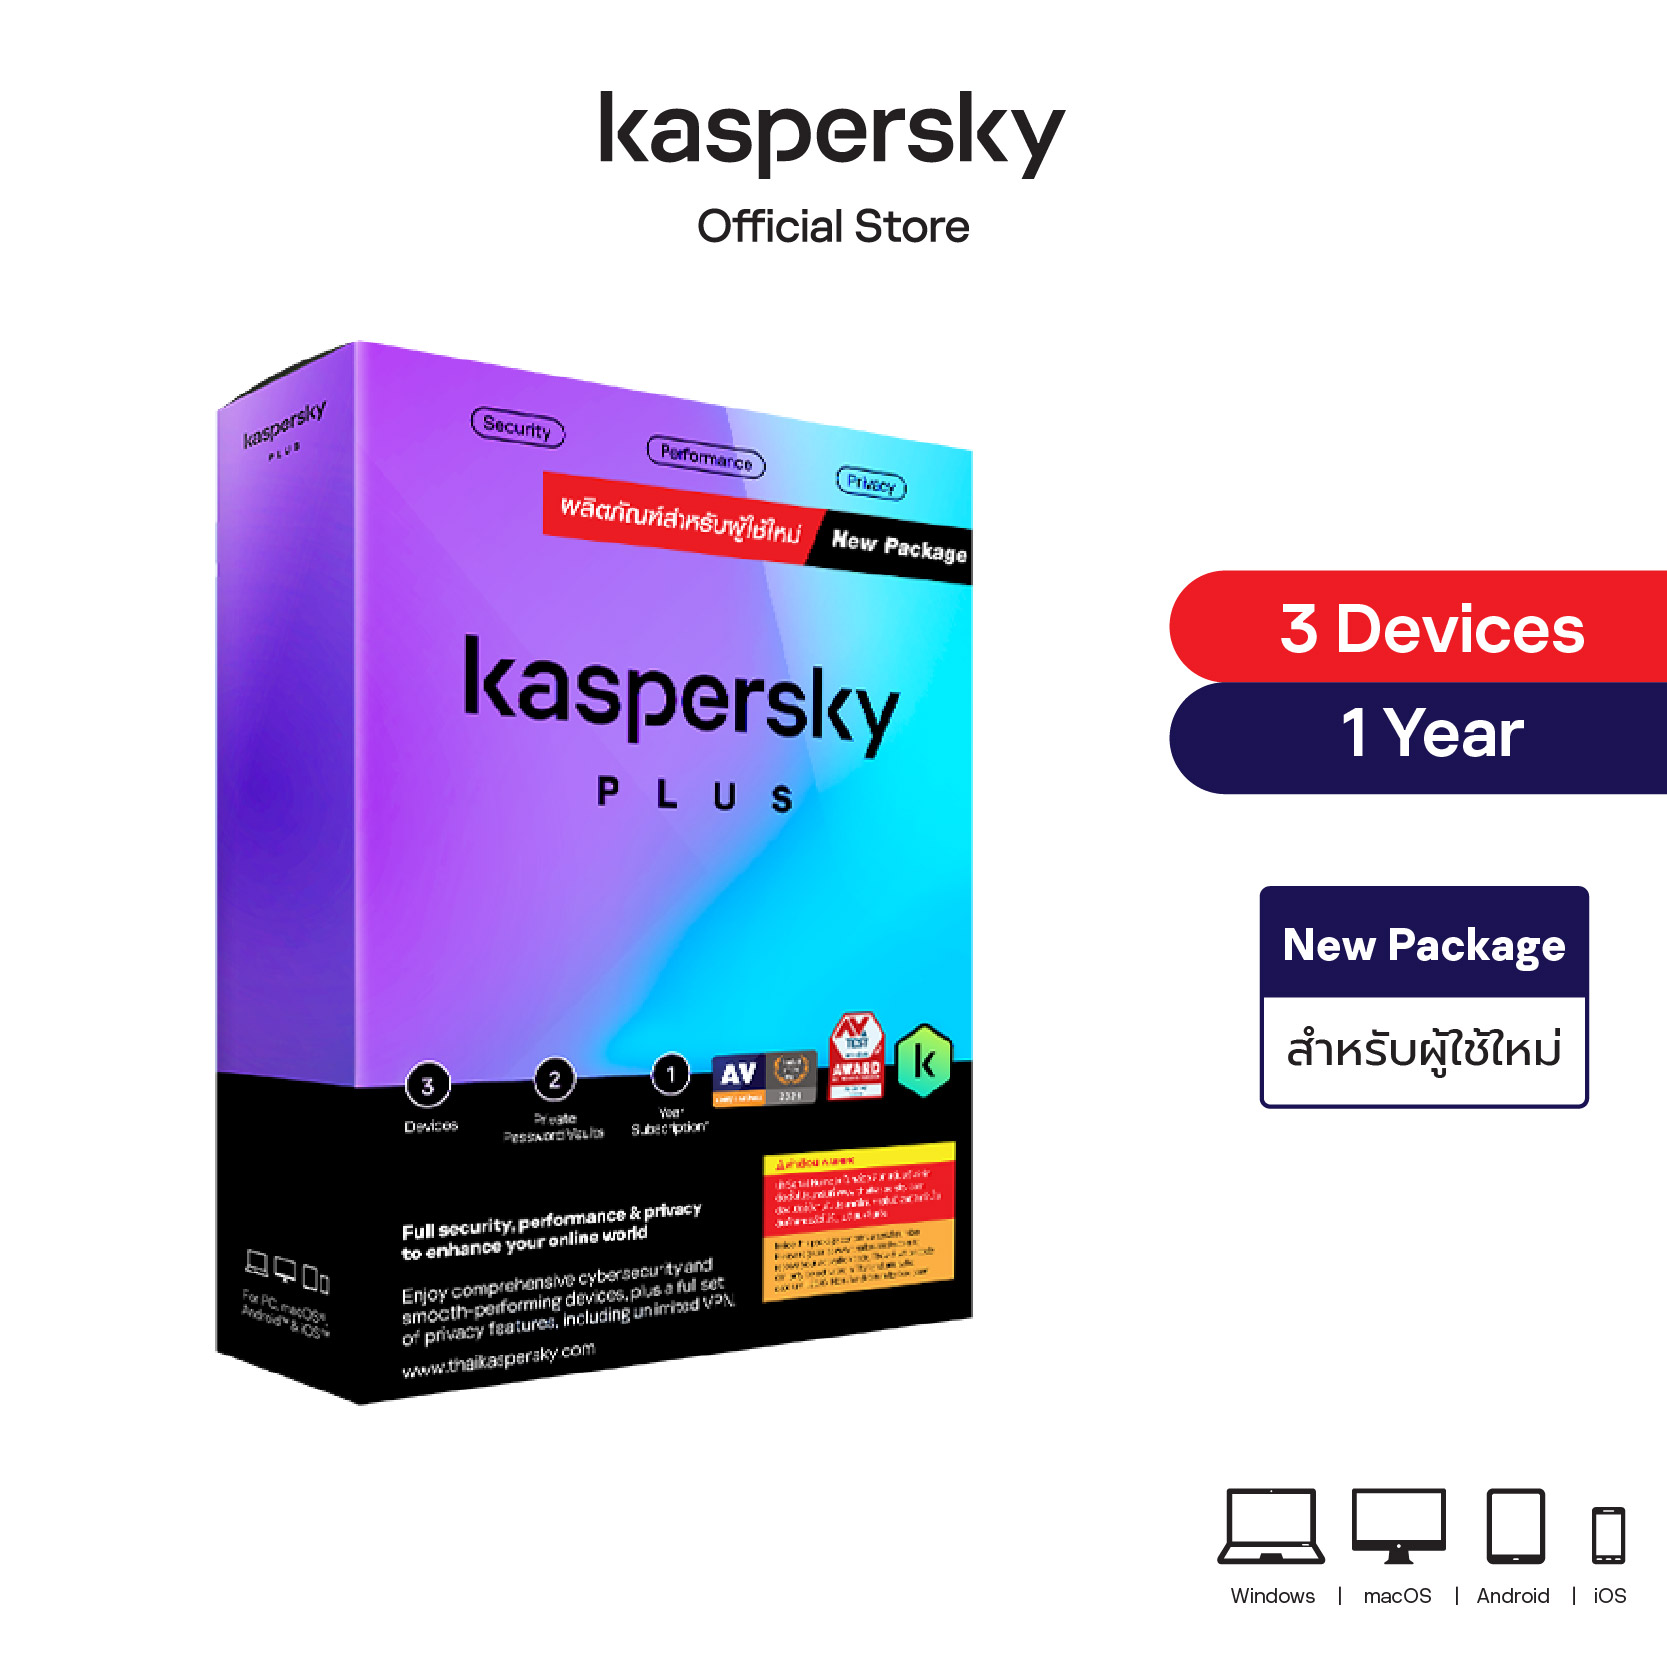 Kaspersky Plus 3 Devices 1 Year